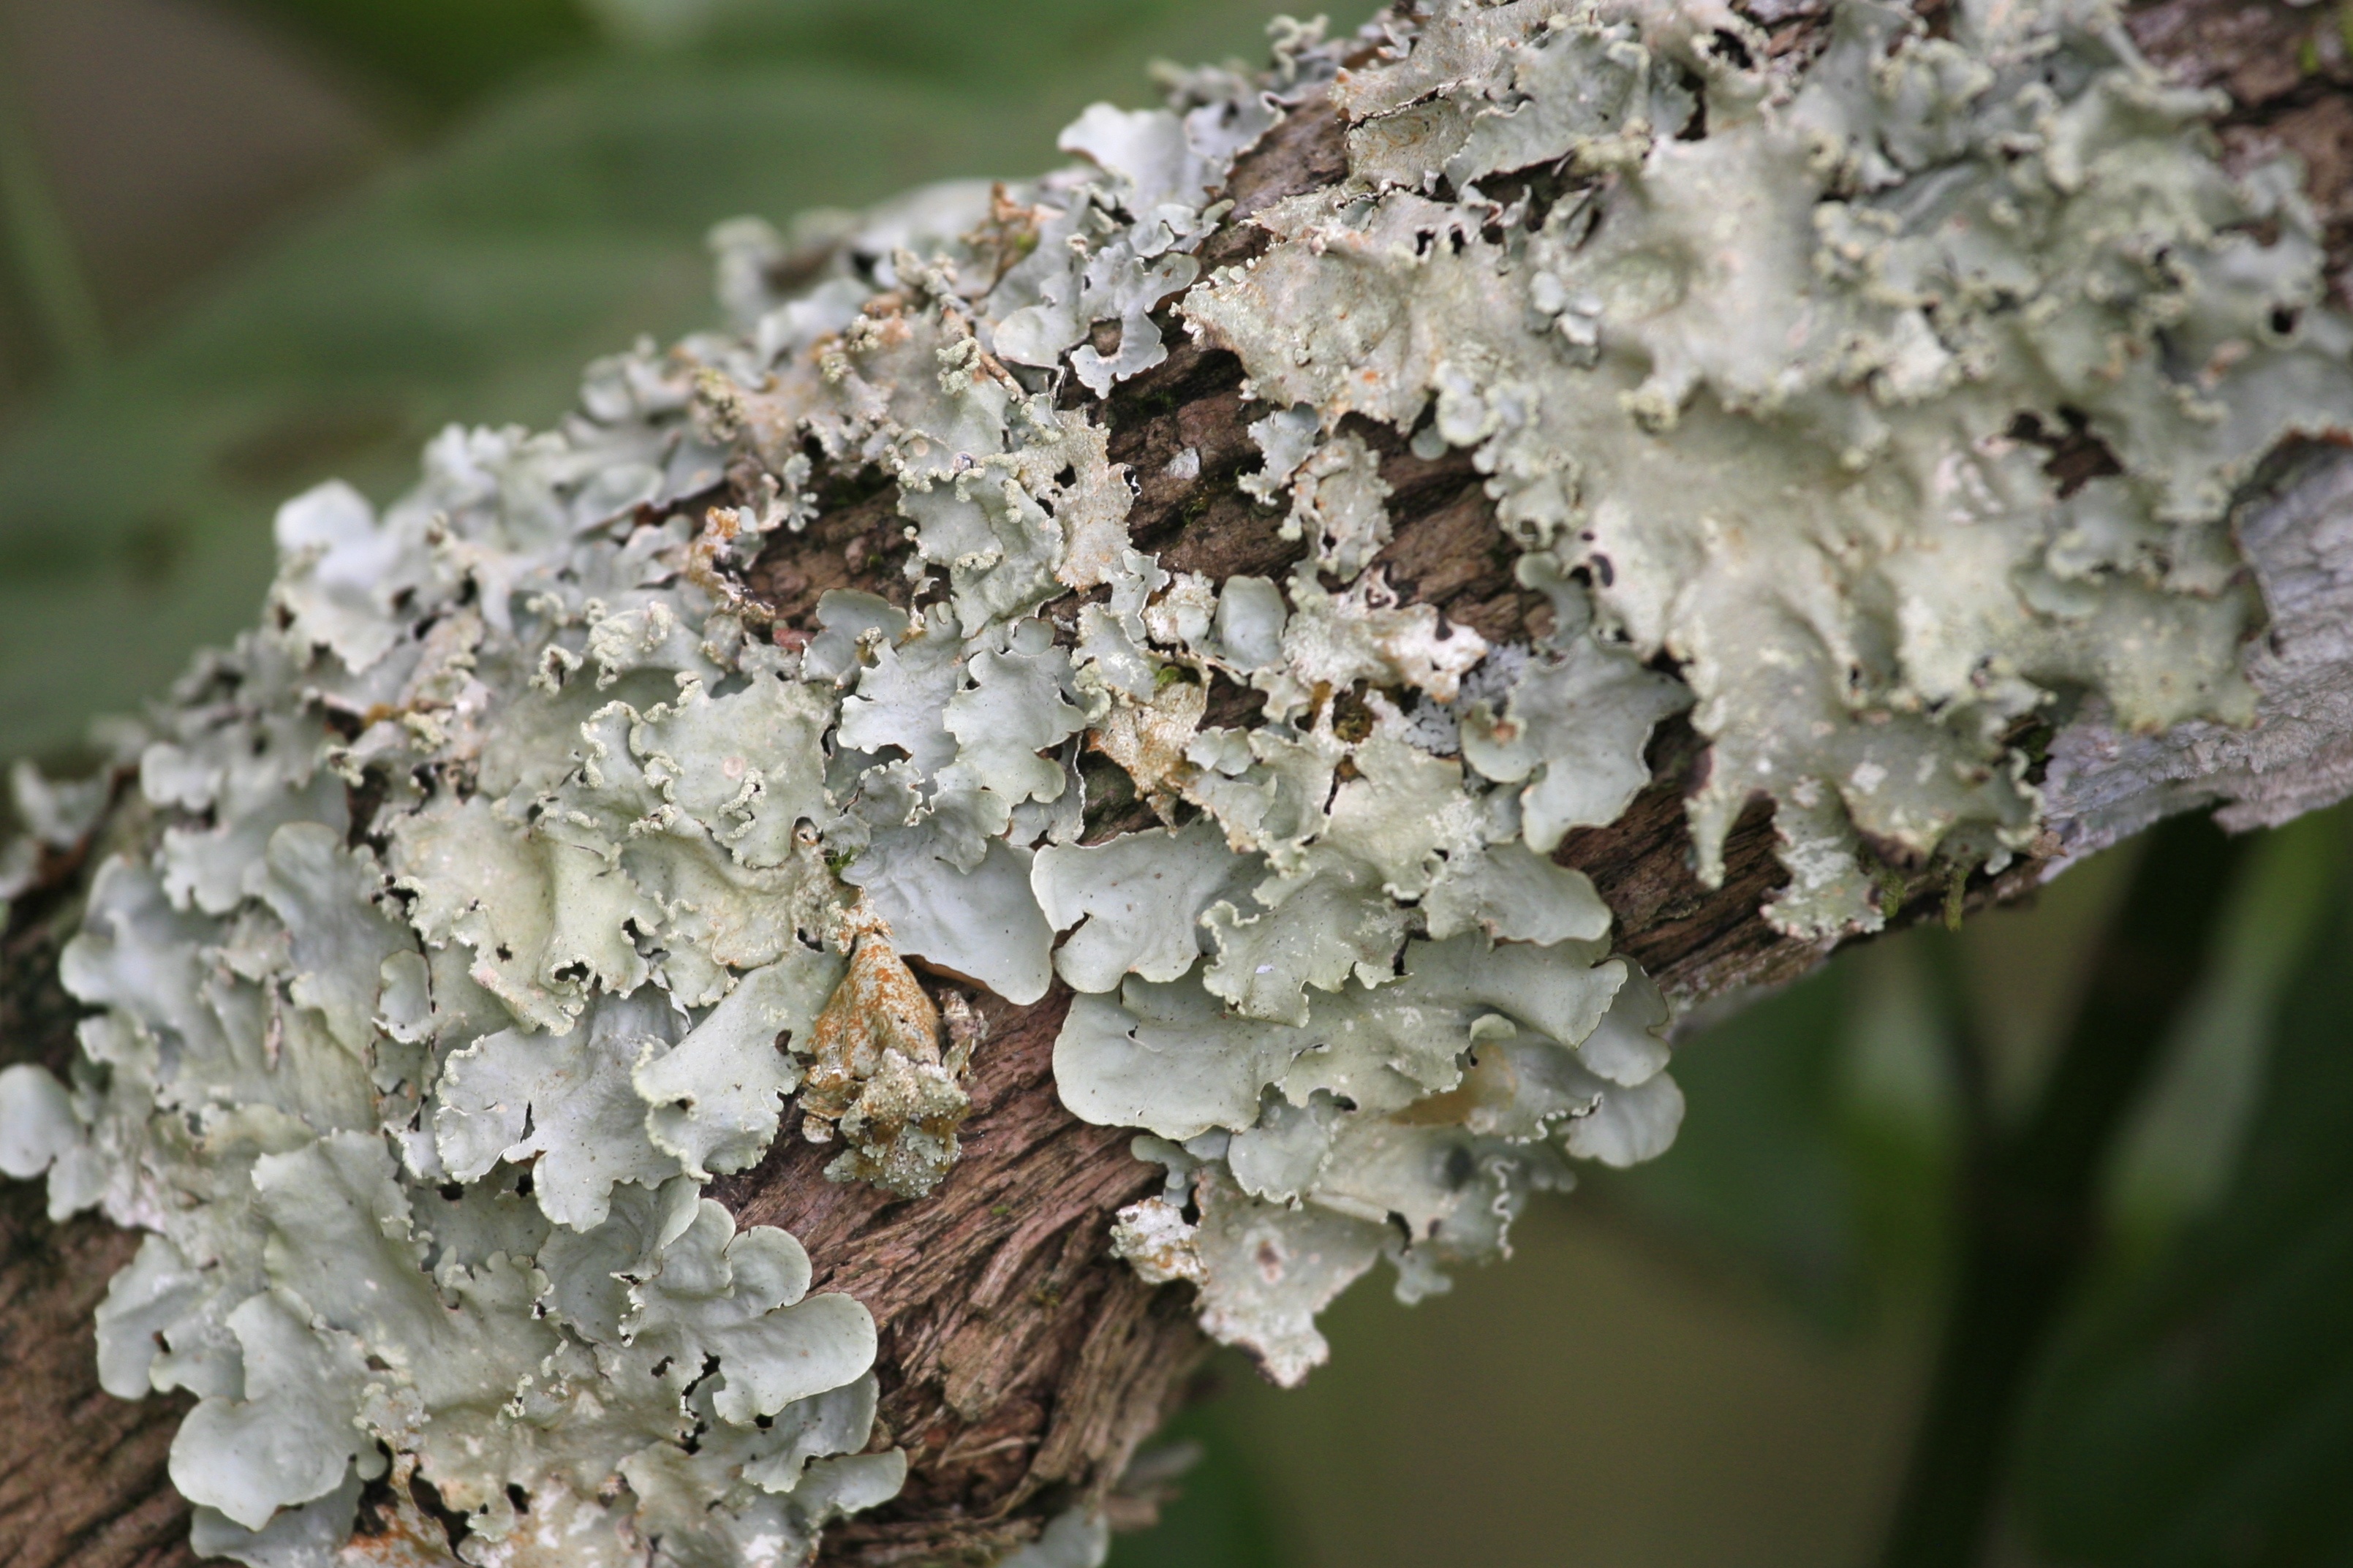 Lichens: A Remarkable Indicator of Pollution